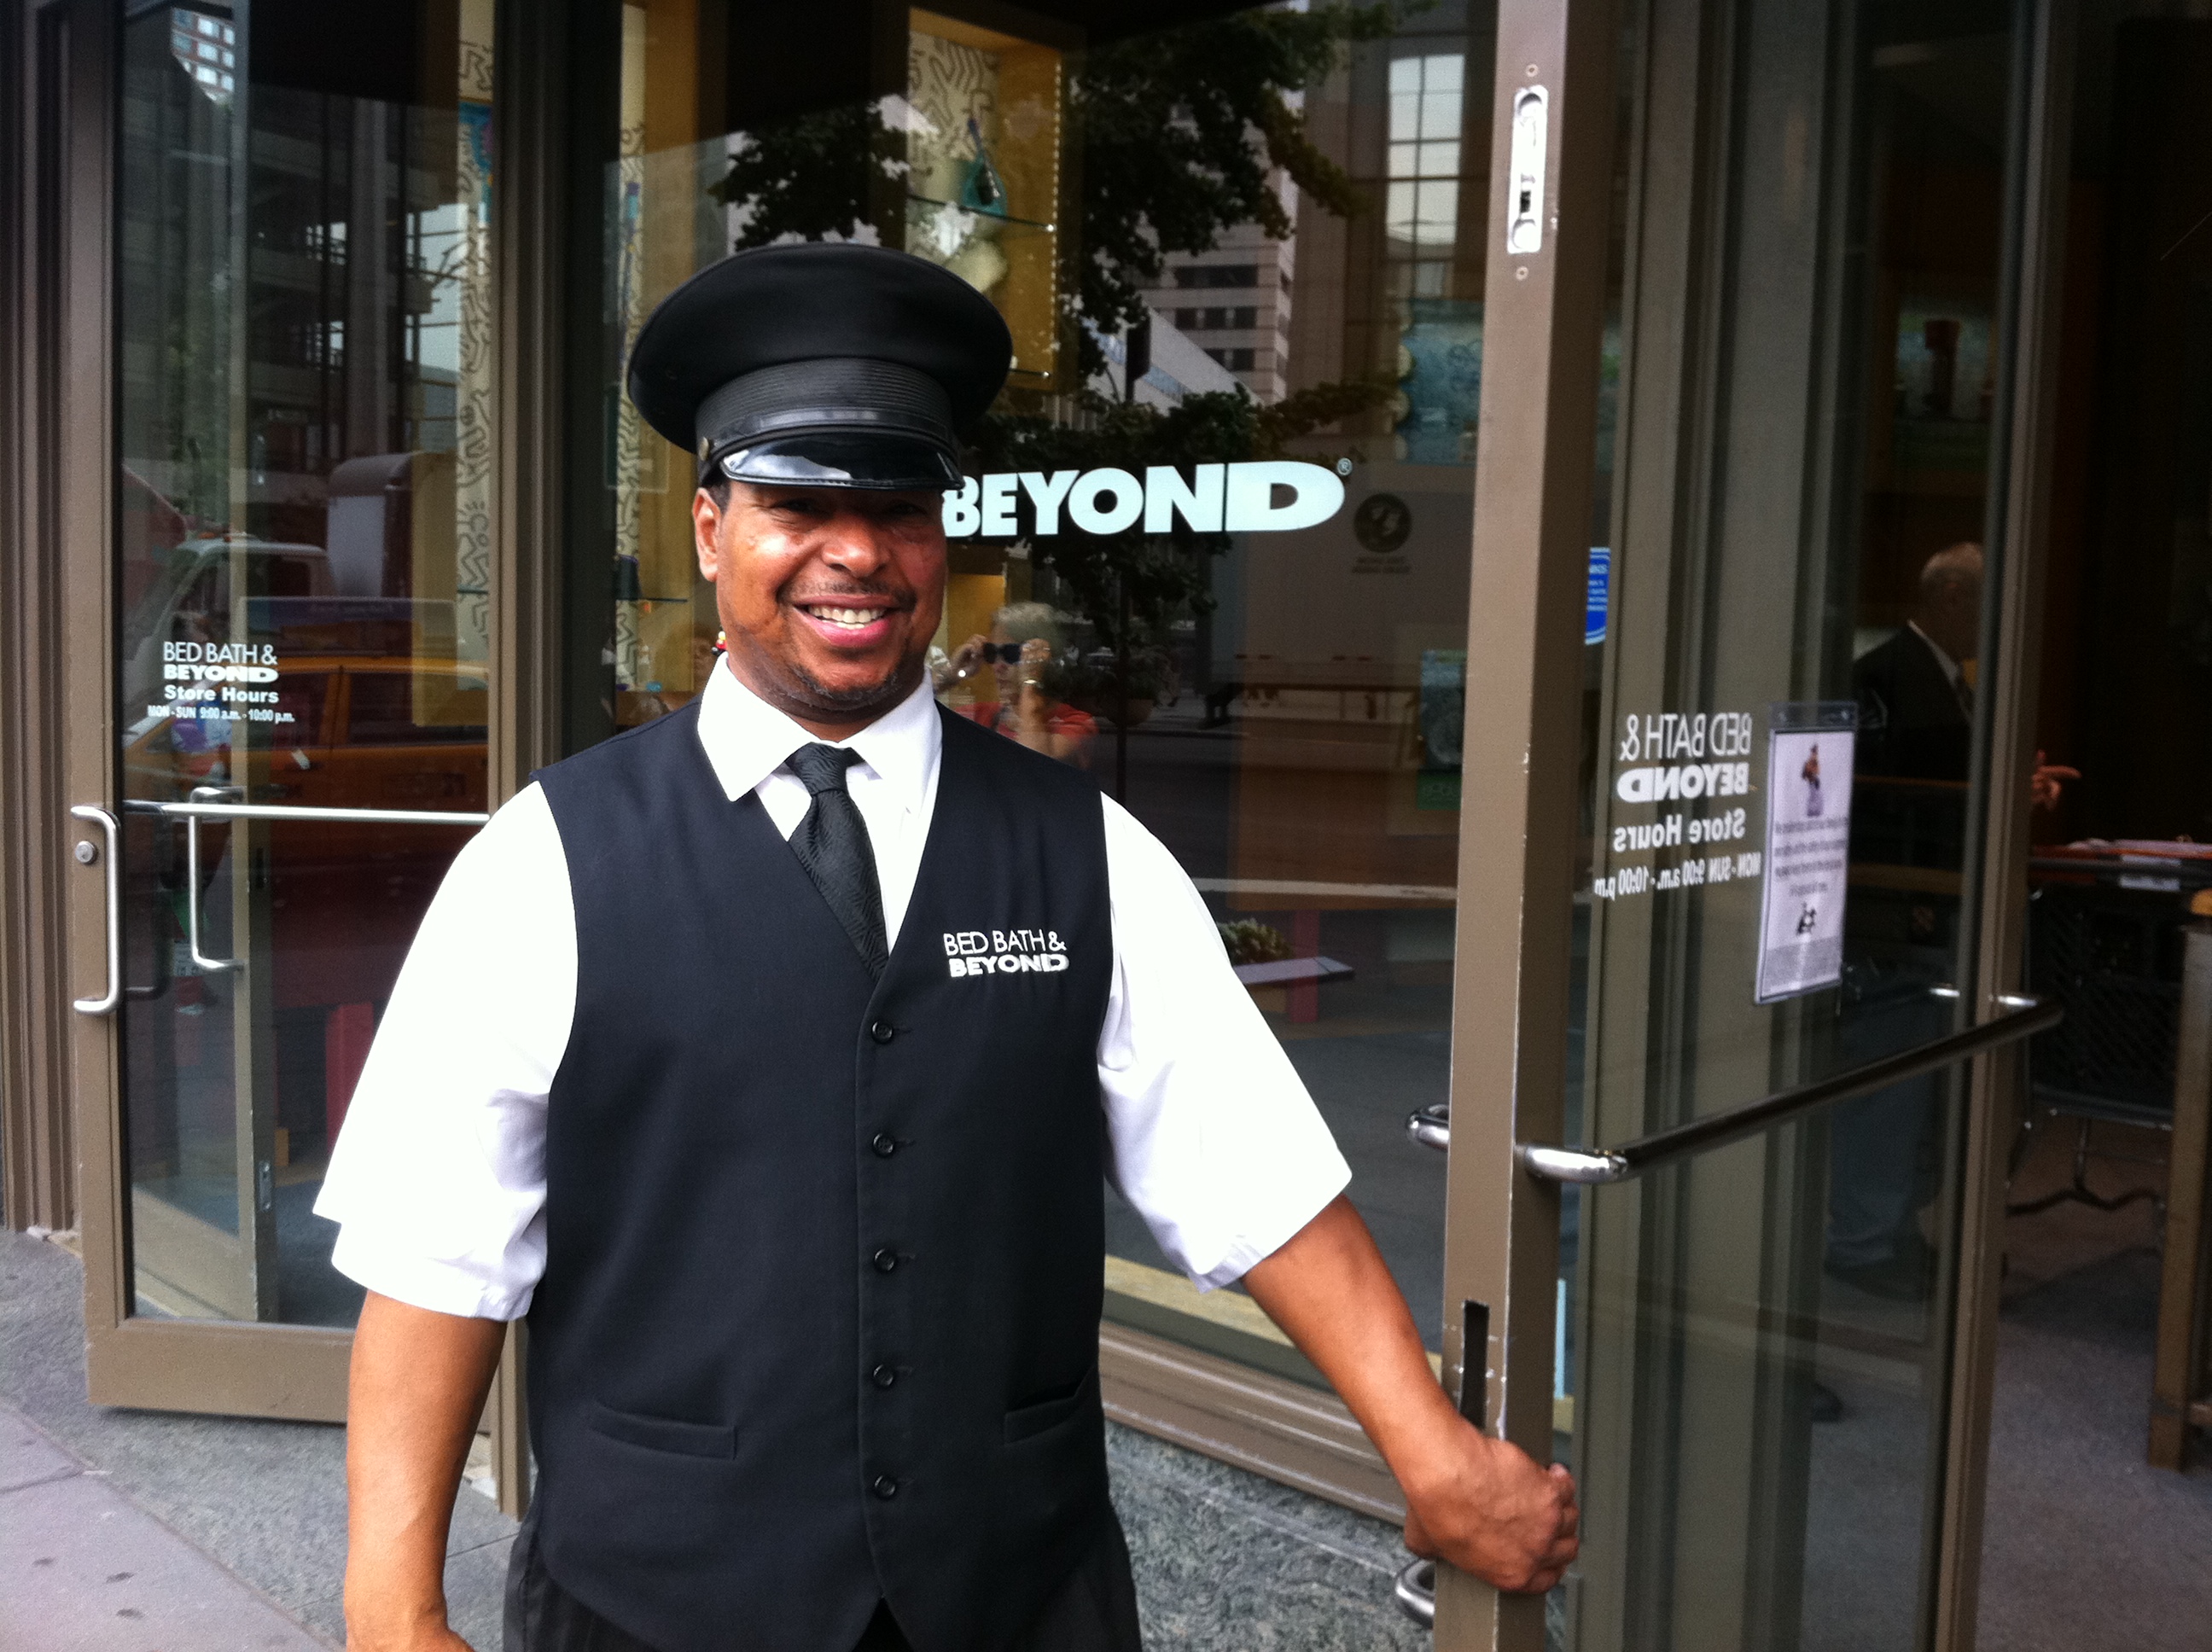 Bed, Bath and Beyond Store Near Lincoln Center: Doormen Greet ...